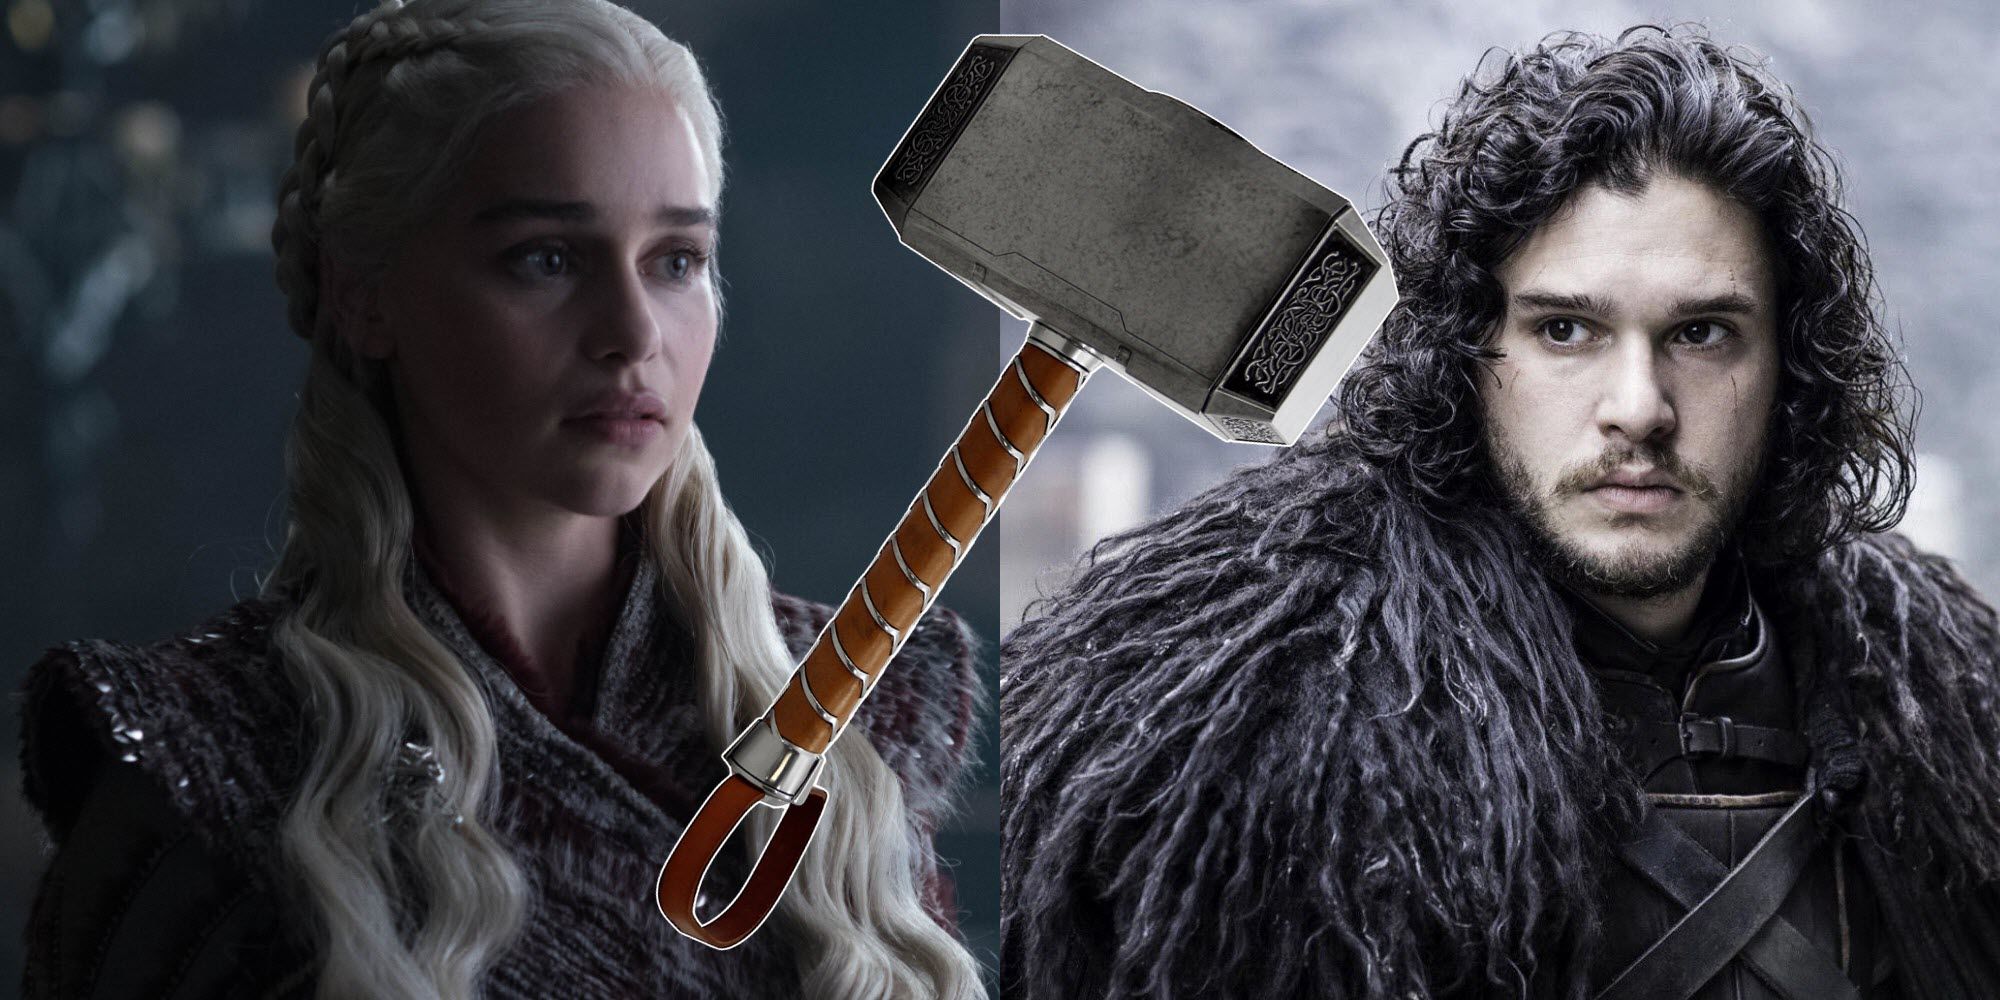 A collage of Daenerys and Jon Snow, with Mjolnir in the middle